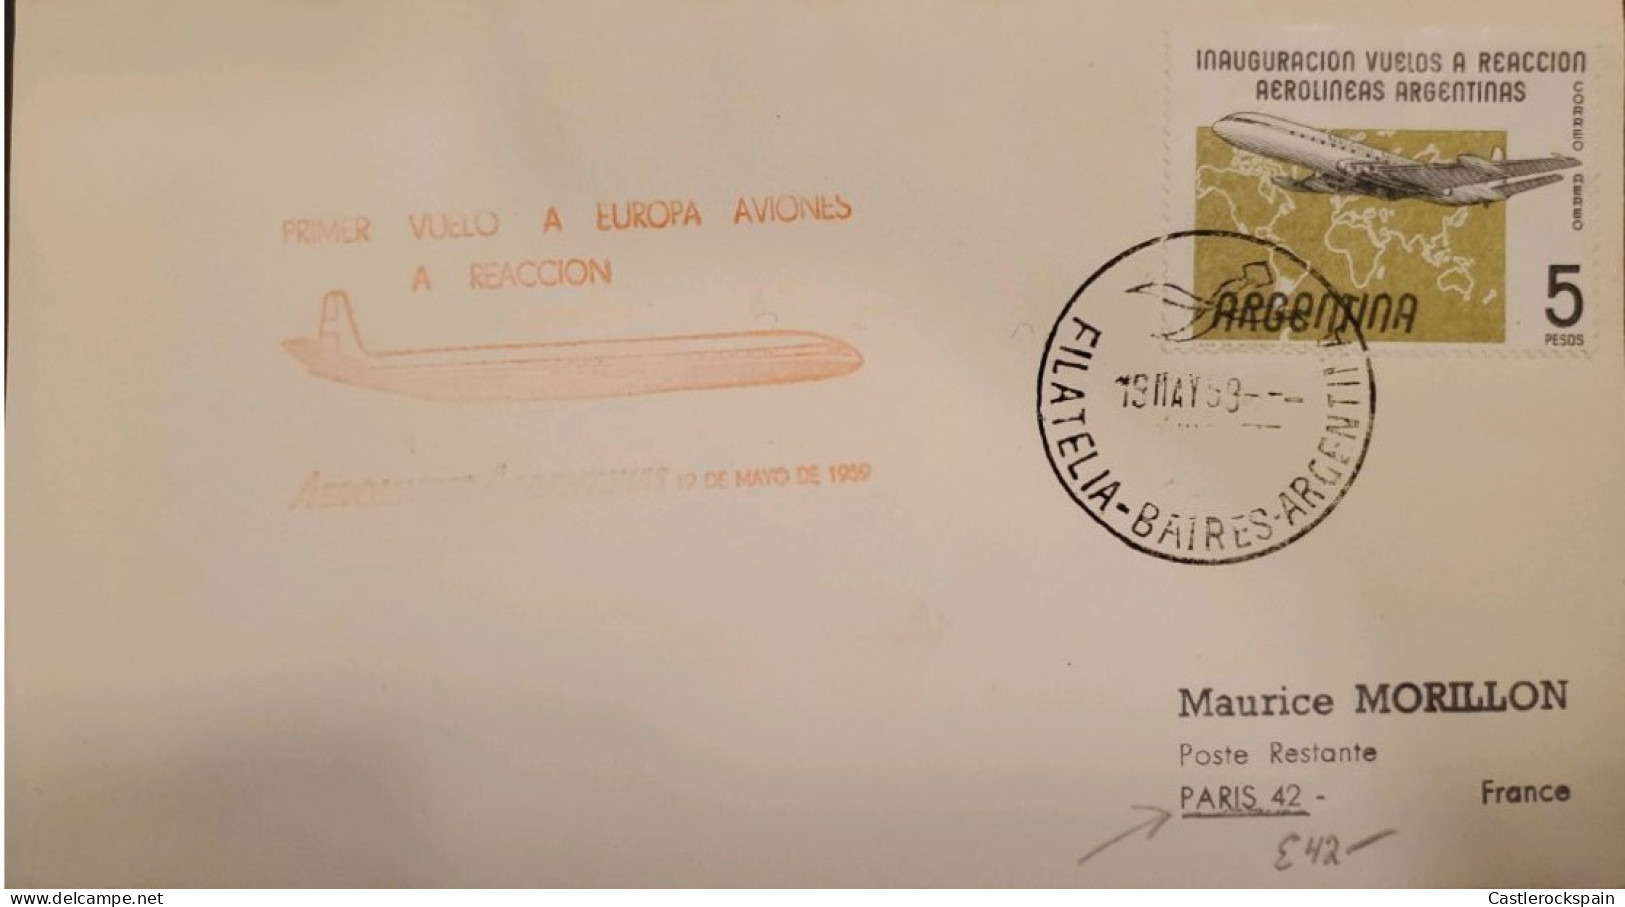 MI) 1958, ARGENTINA, FIRST FLIGHT TO EUROPE CANCELLATION, FROM BUENOS AIRES TO PARIS - FRANCE, AIR MAIL, XF - Gebruikt